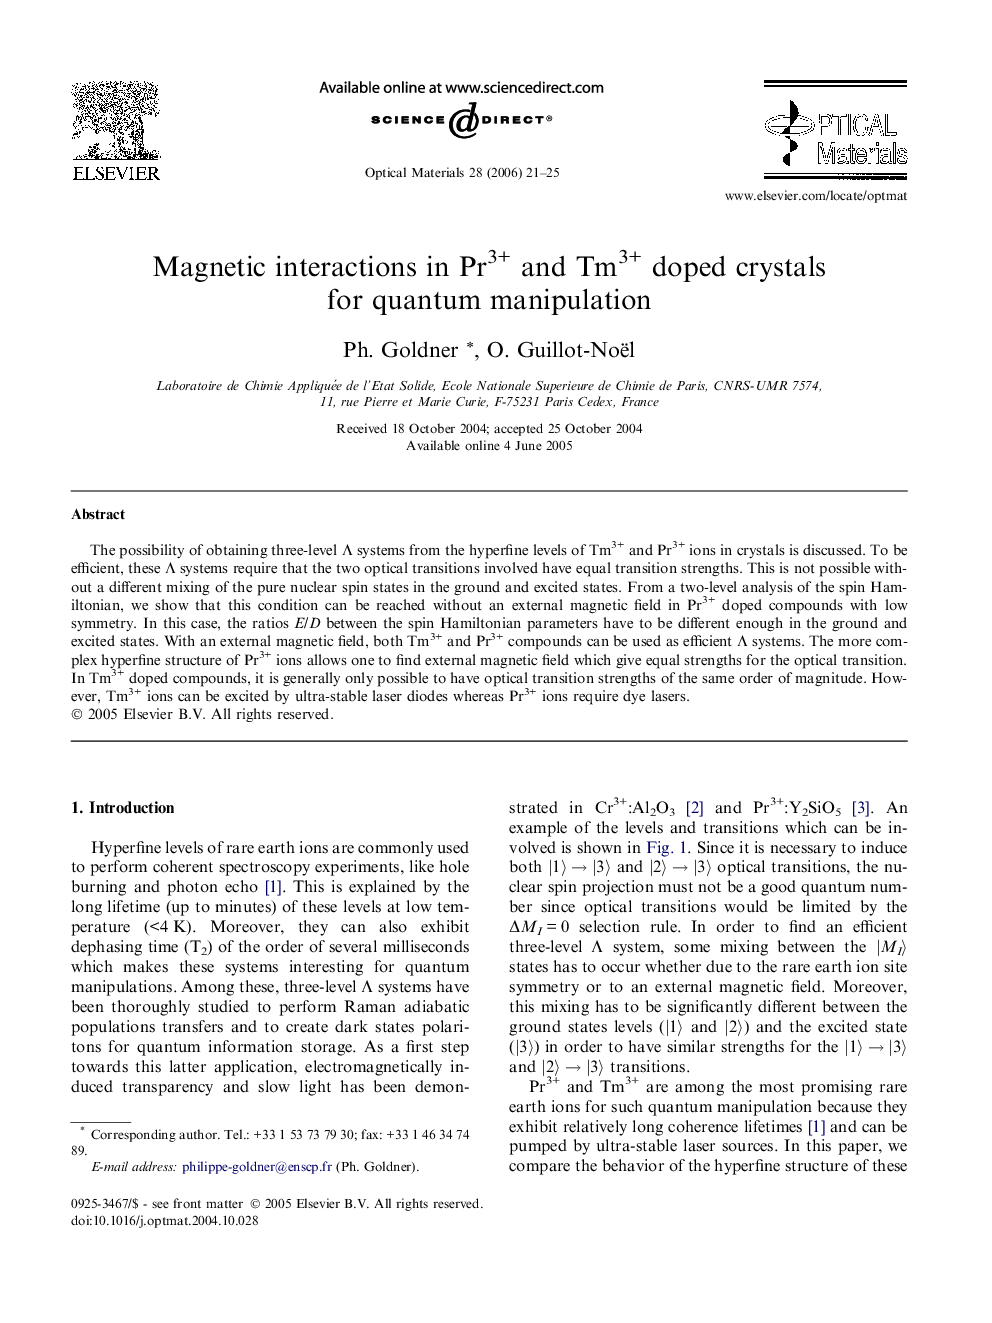 Magnetic interactions in Pr3+ and Tm3+ doped crystals for quantum manipulation